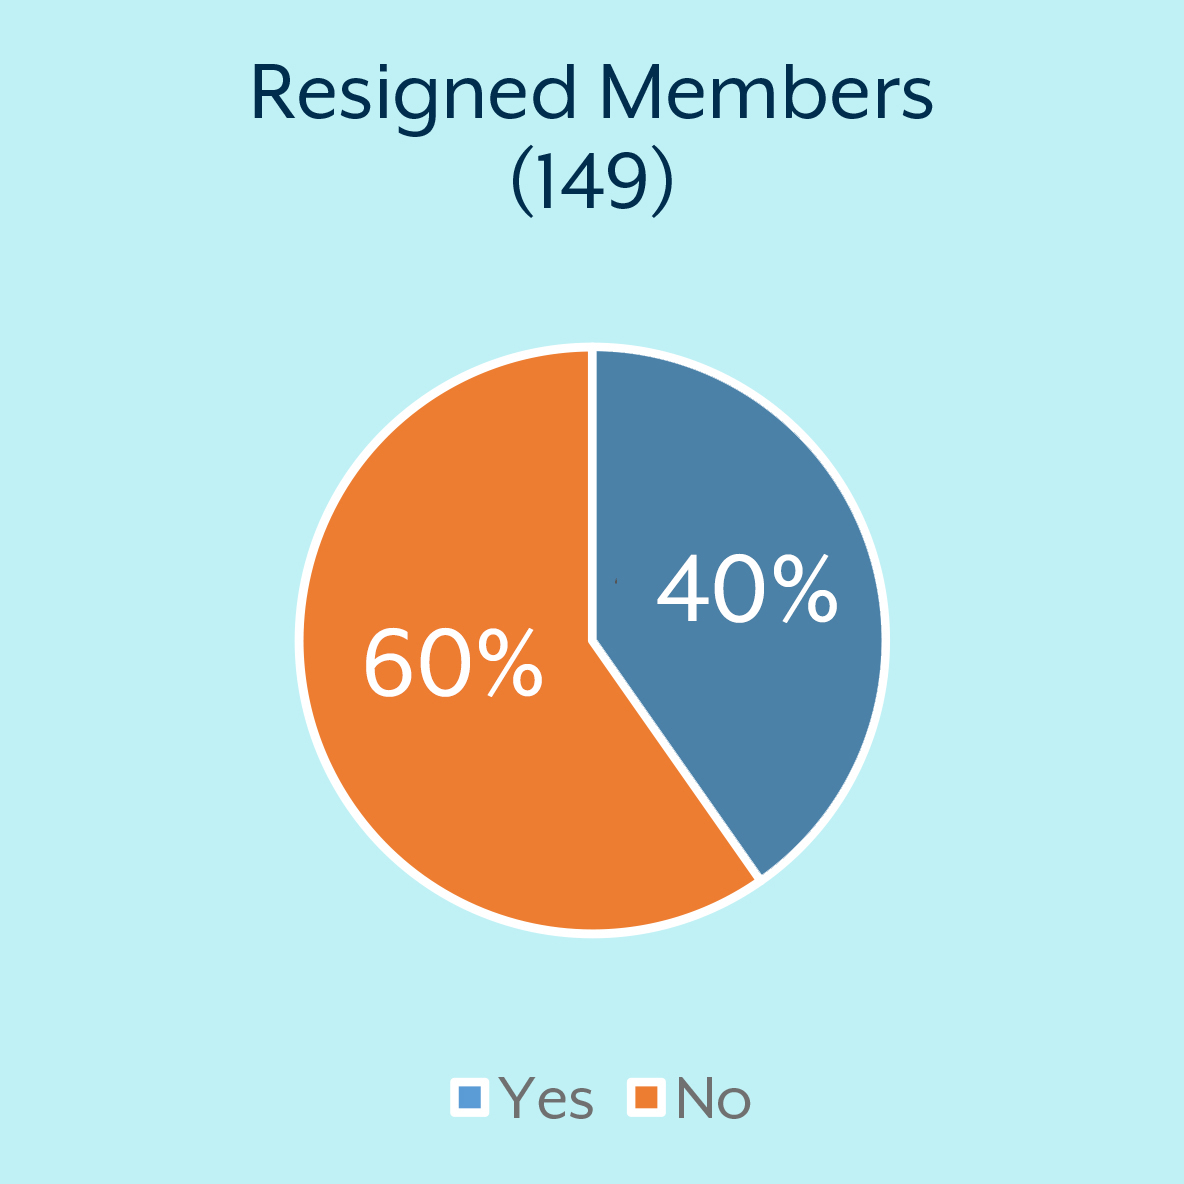 Resigned members: Yes = 40% No = 60%